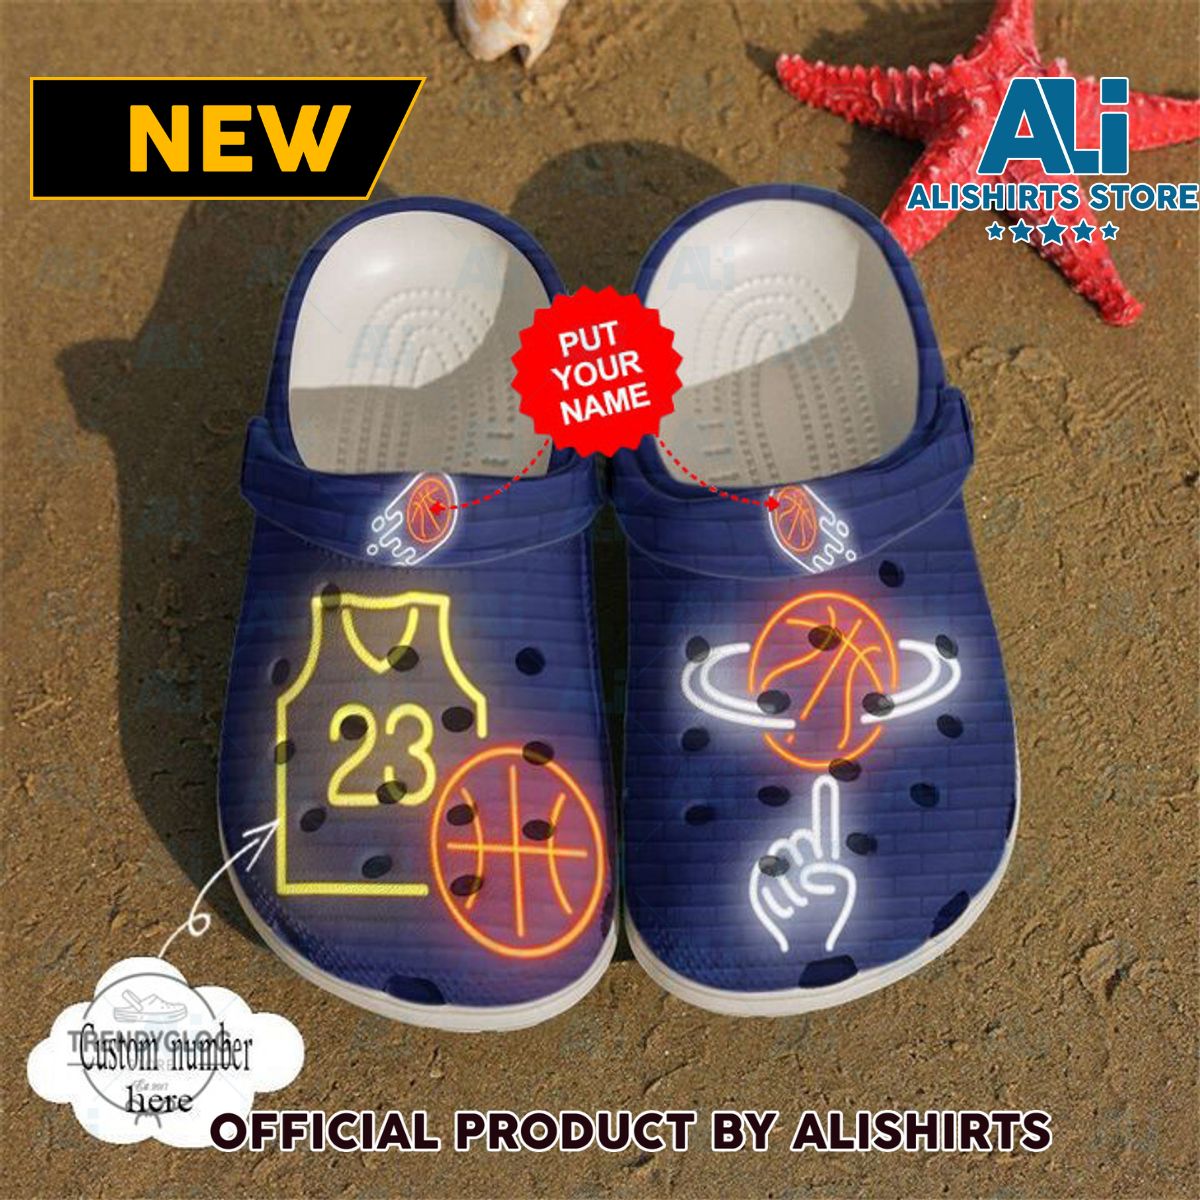 Basketball Personalized Neon Crocs Crocband Clog Shoes